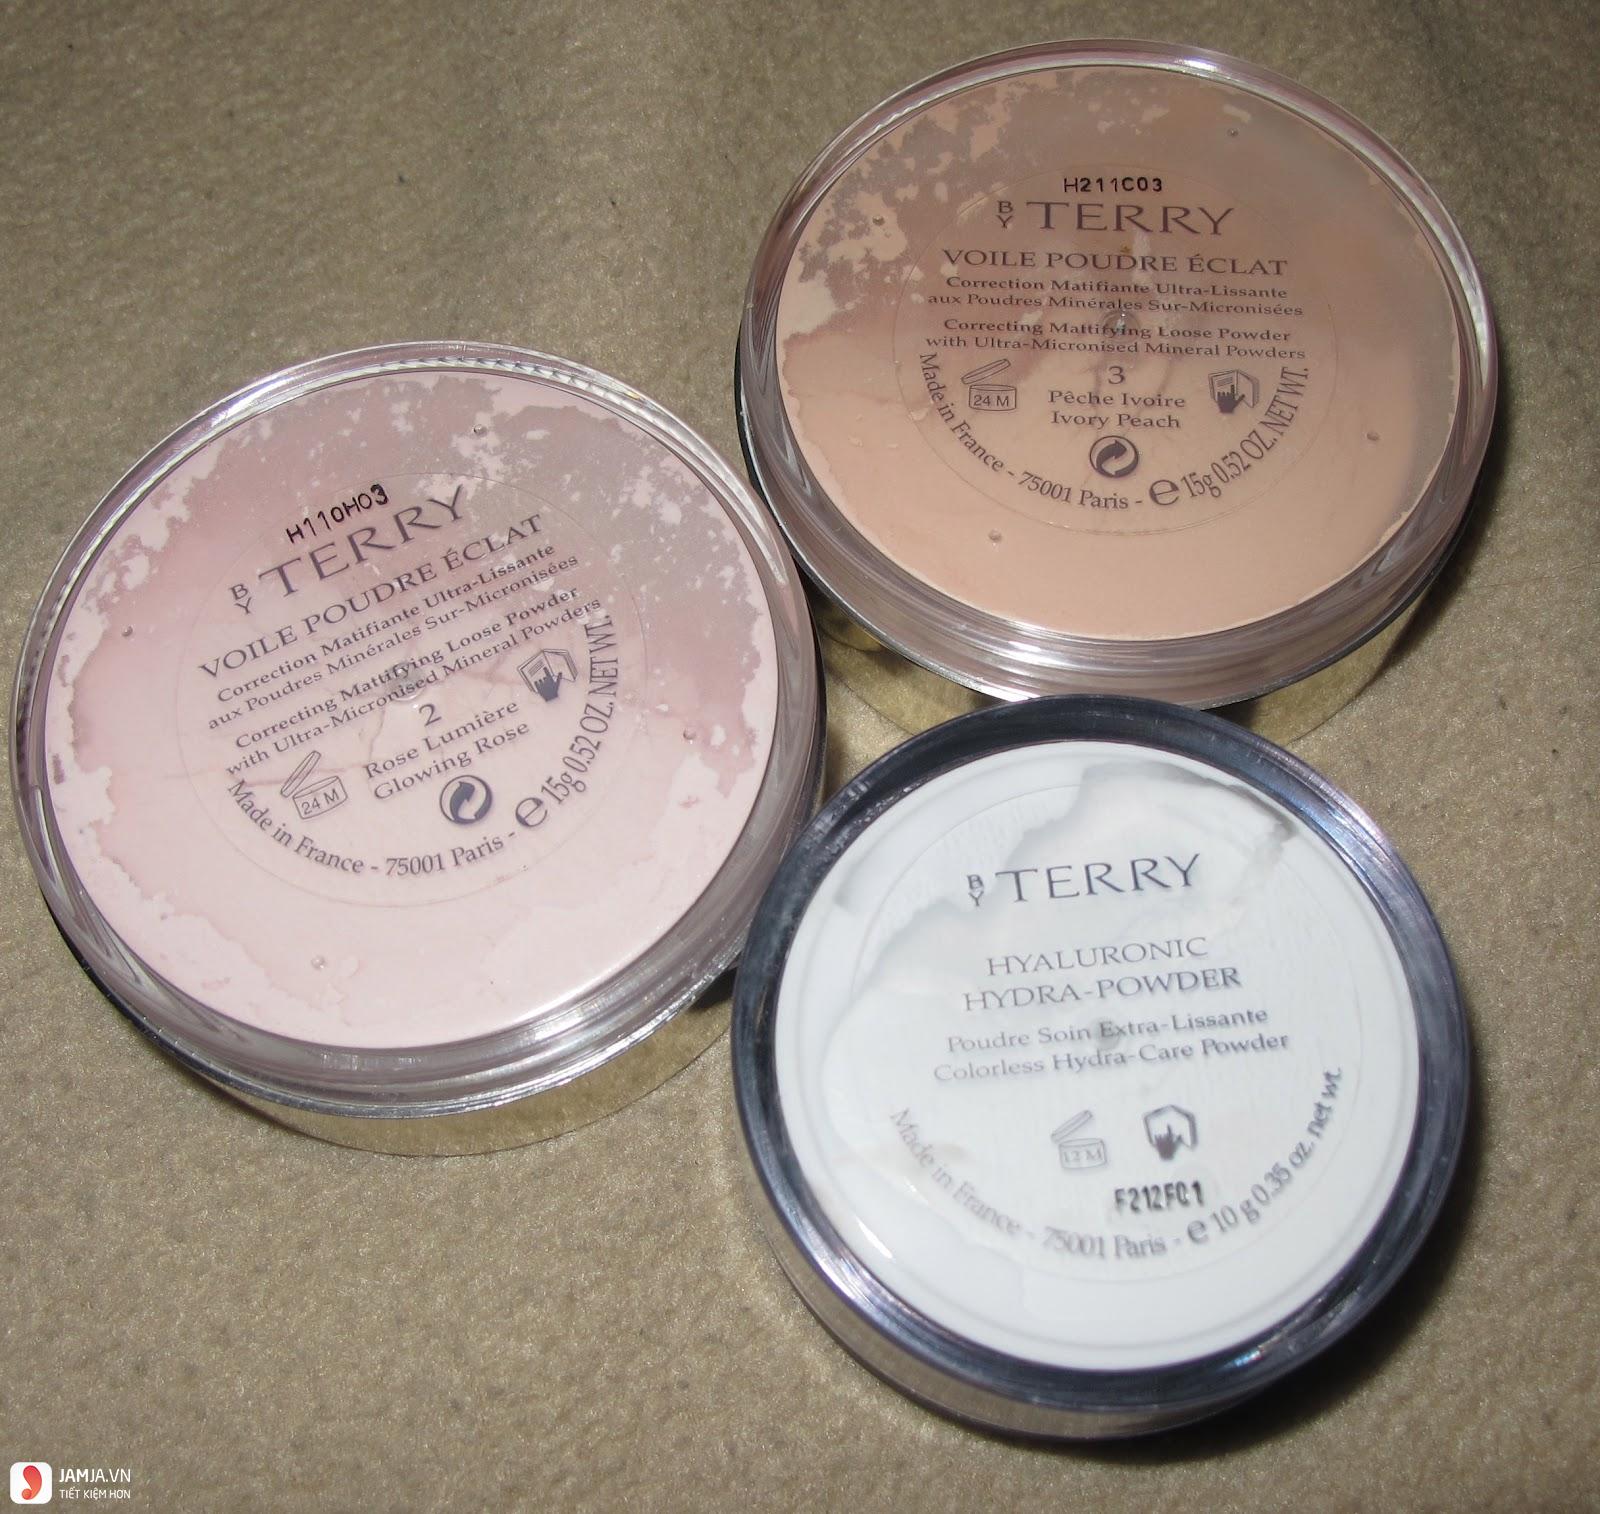 By Terry Hyaluronic Hydra-Powder 3